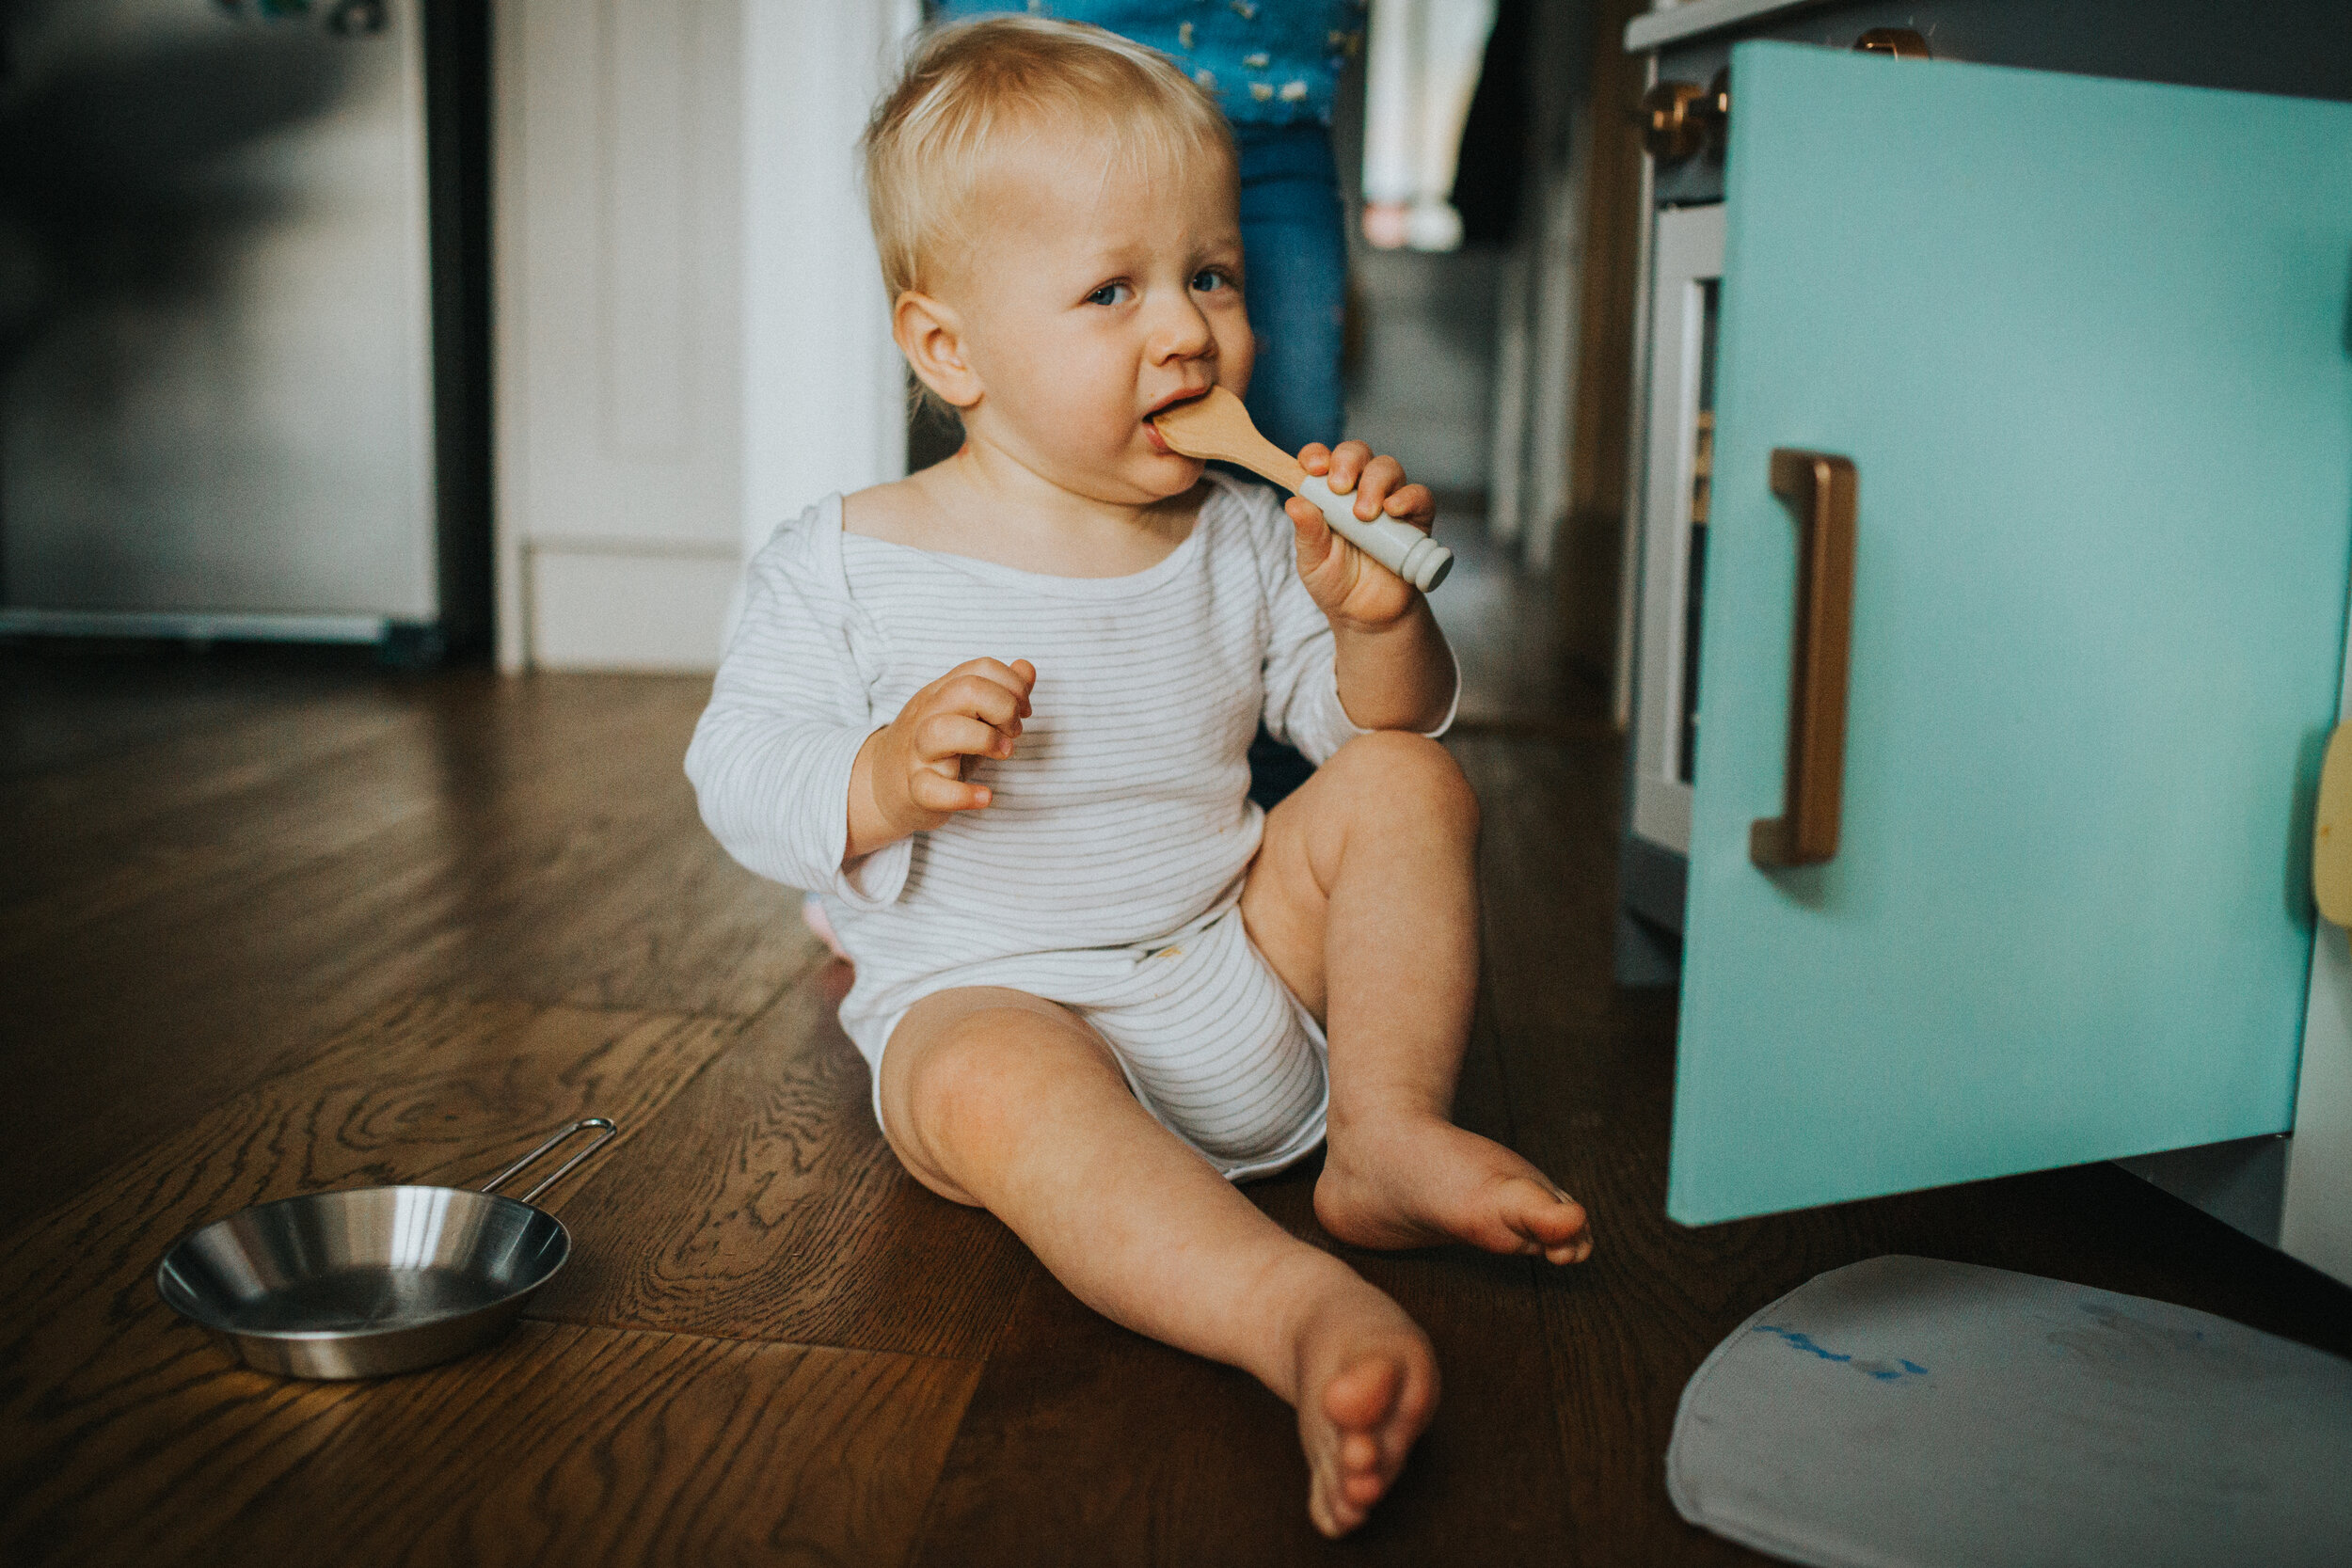 Little boy bites a wooden spoon while peering at the camera. 